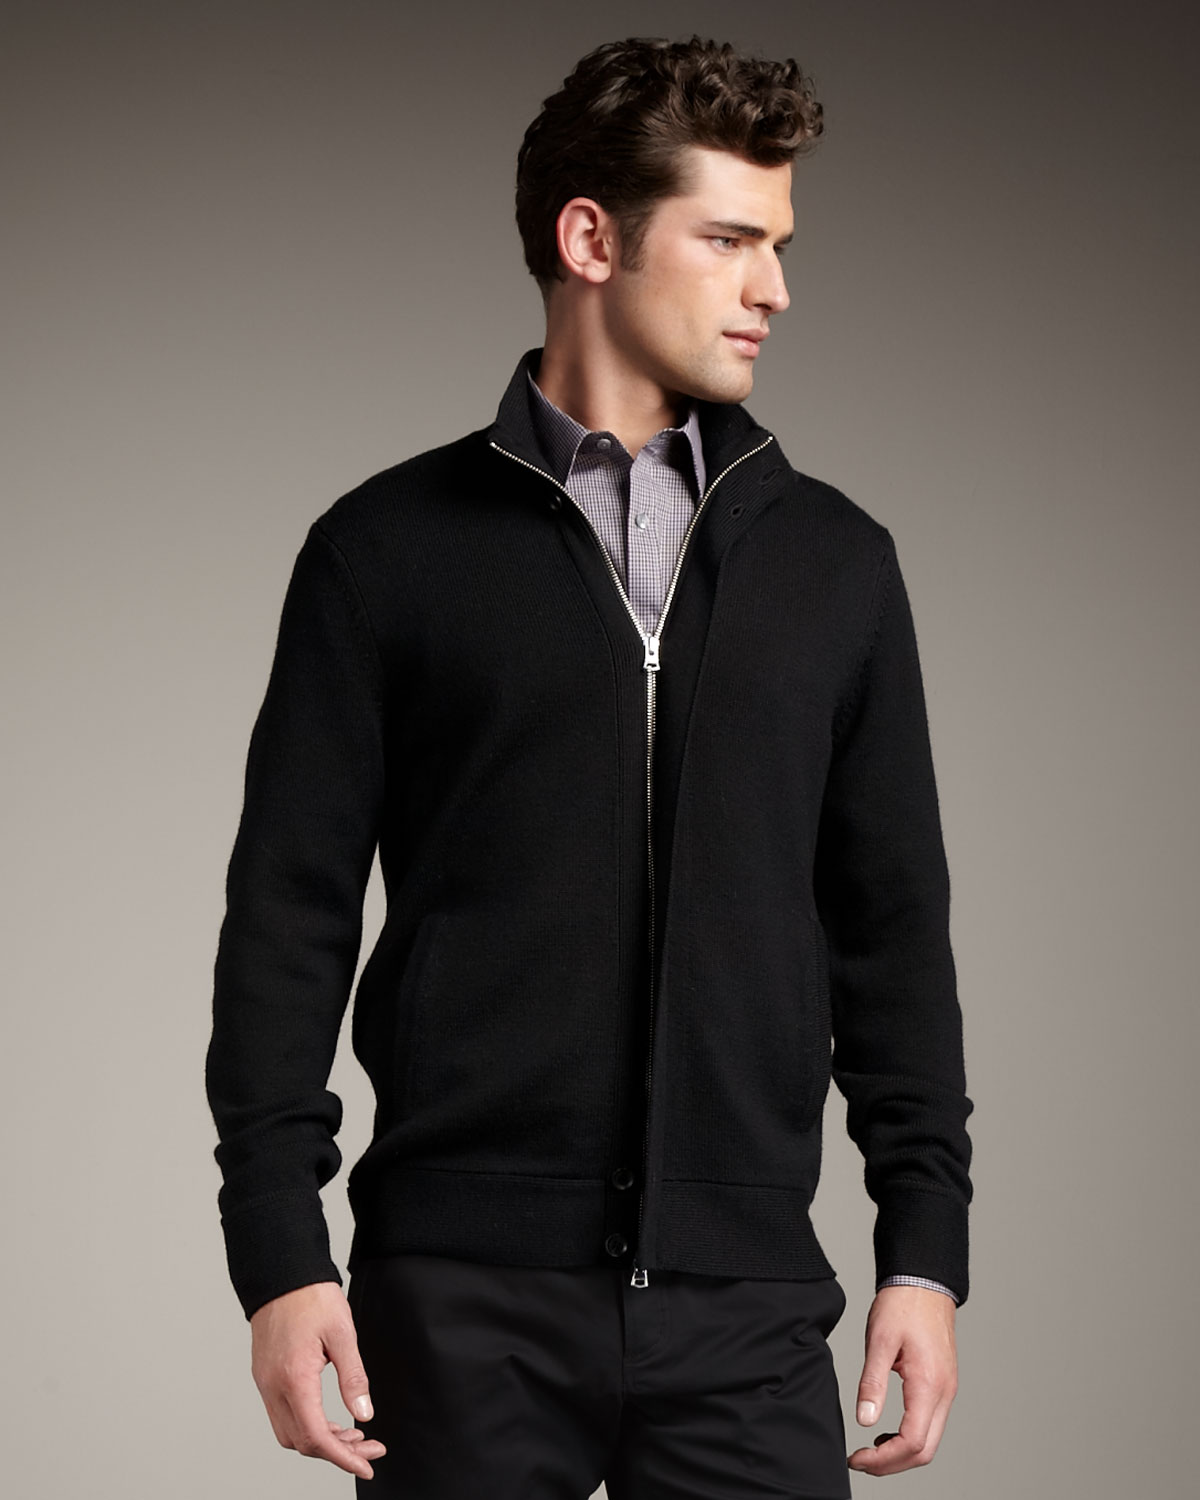 Lyst - Theory Zip Sweater in Black for Men